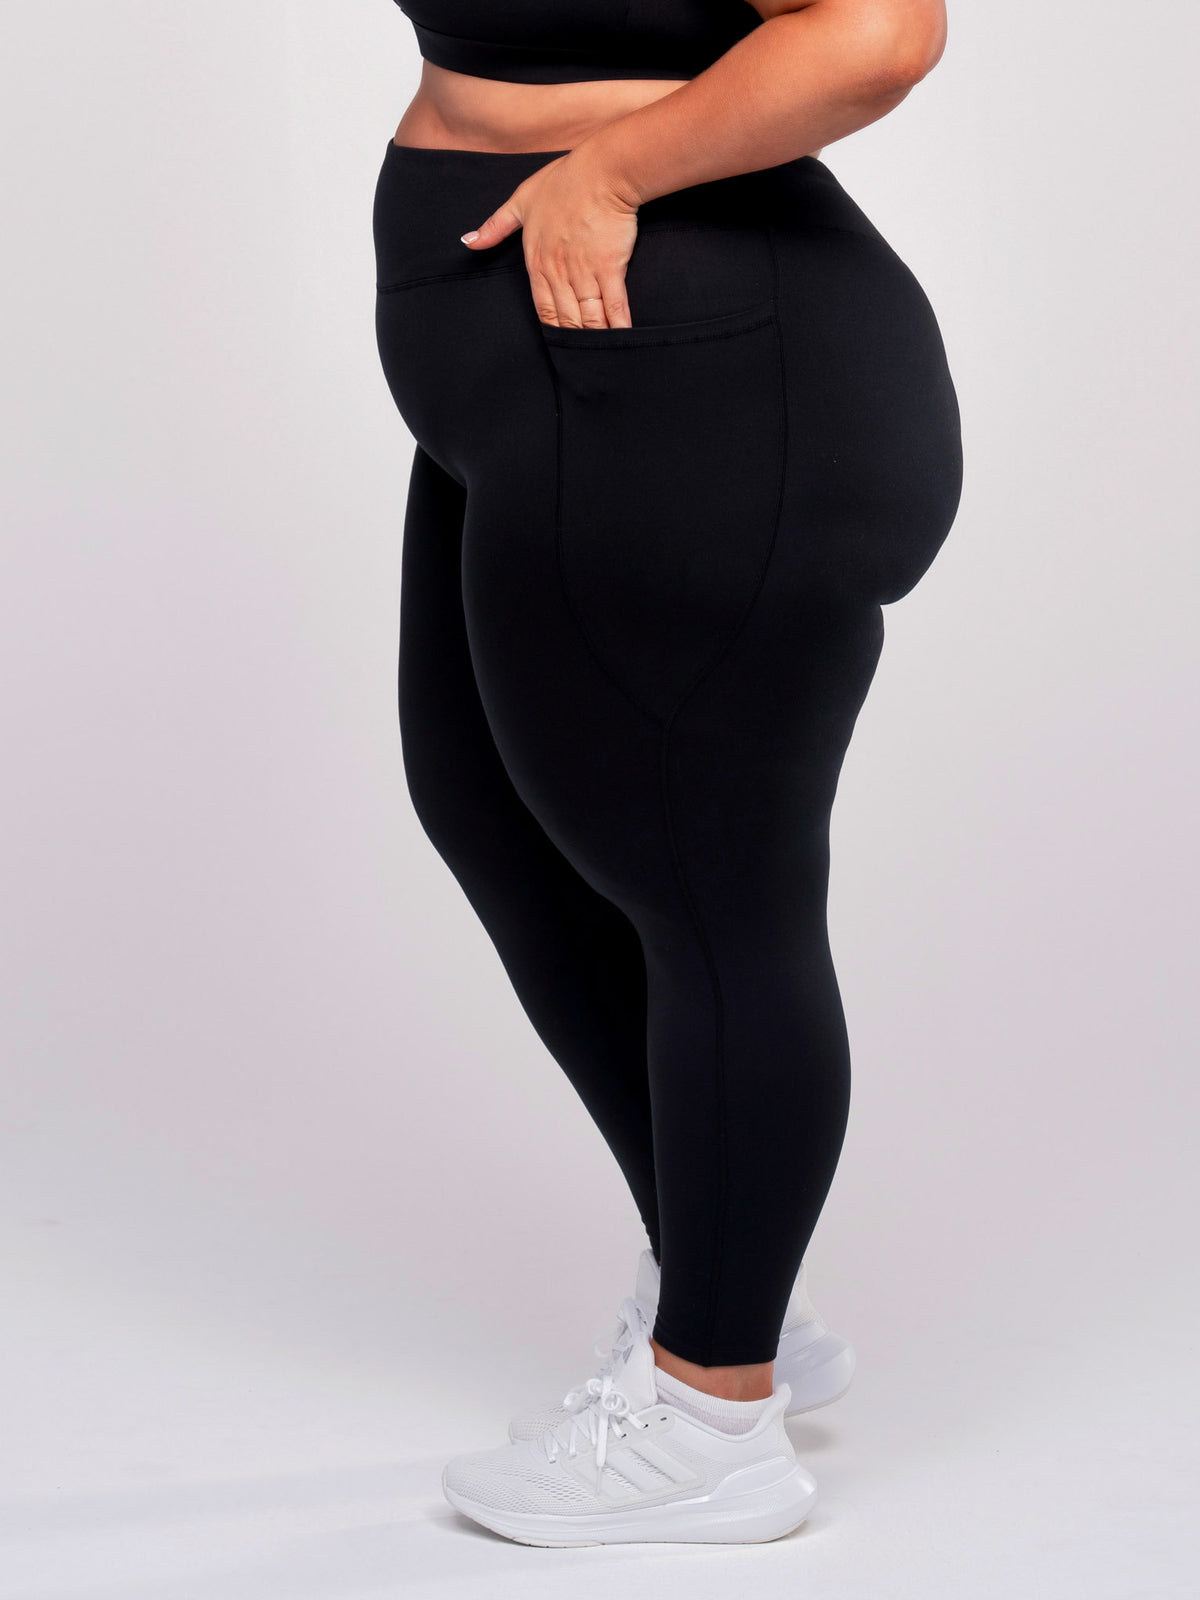 Show off your curves in our sculpting leggings 🍑 Link in bio to shop 🛍️